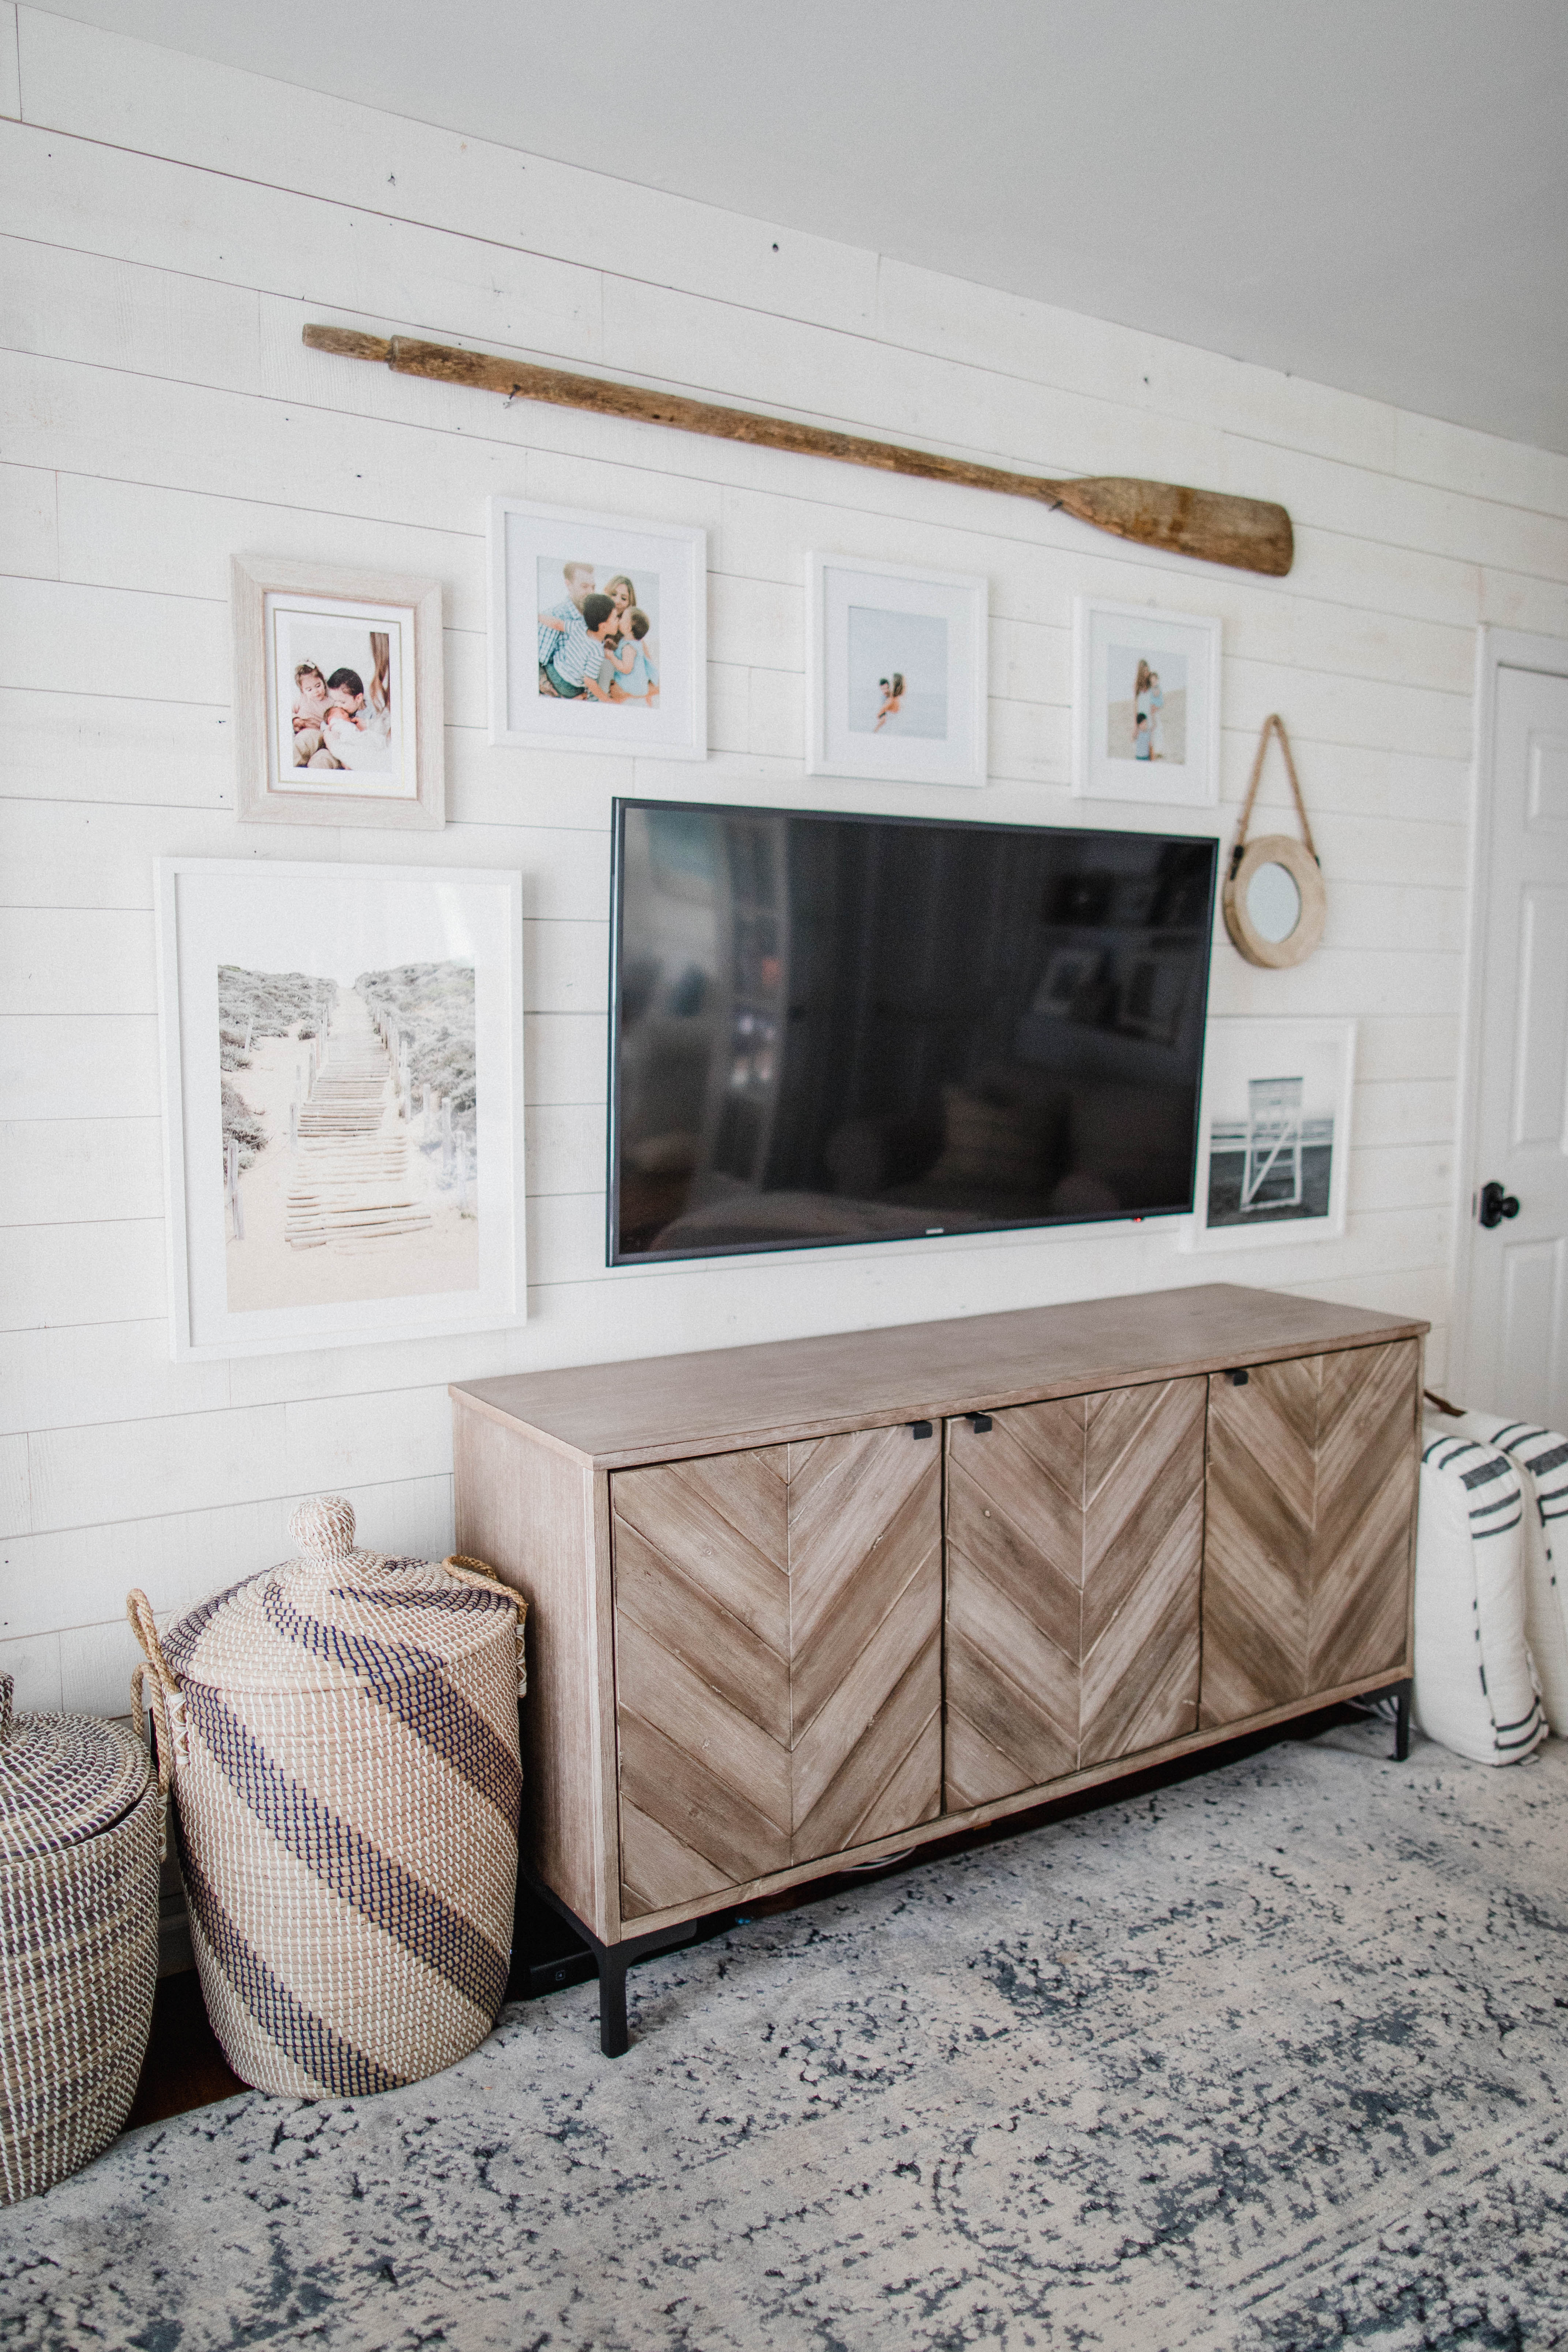 Connecticut life and style blogger Lauren McBride shares her Tips for a Dual Purpose Playroom, including how to seamlessly transition your living room to a playspace and back again.